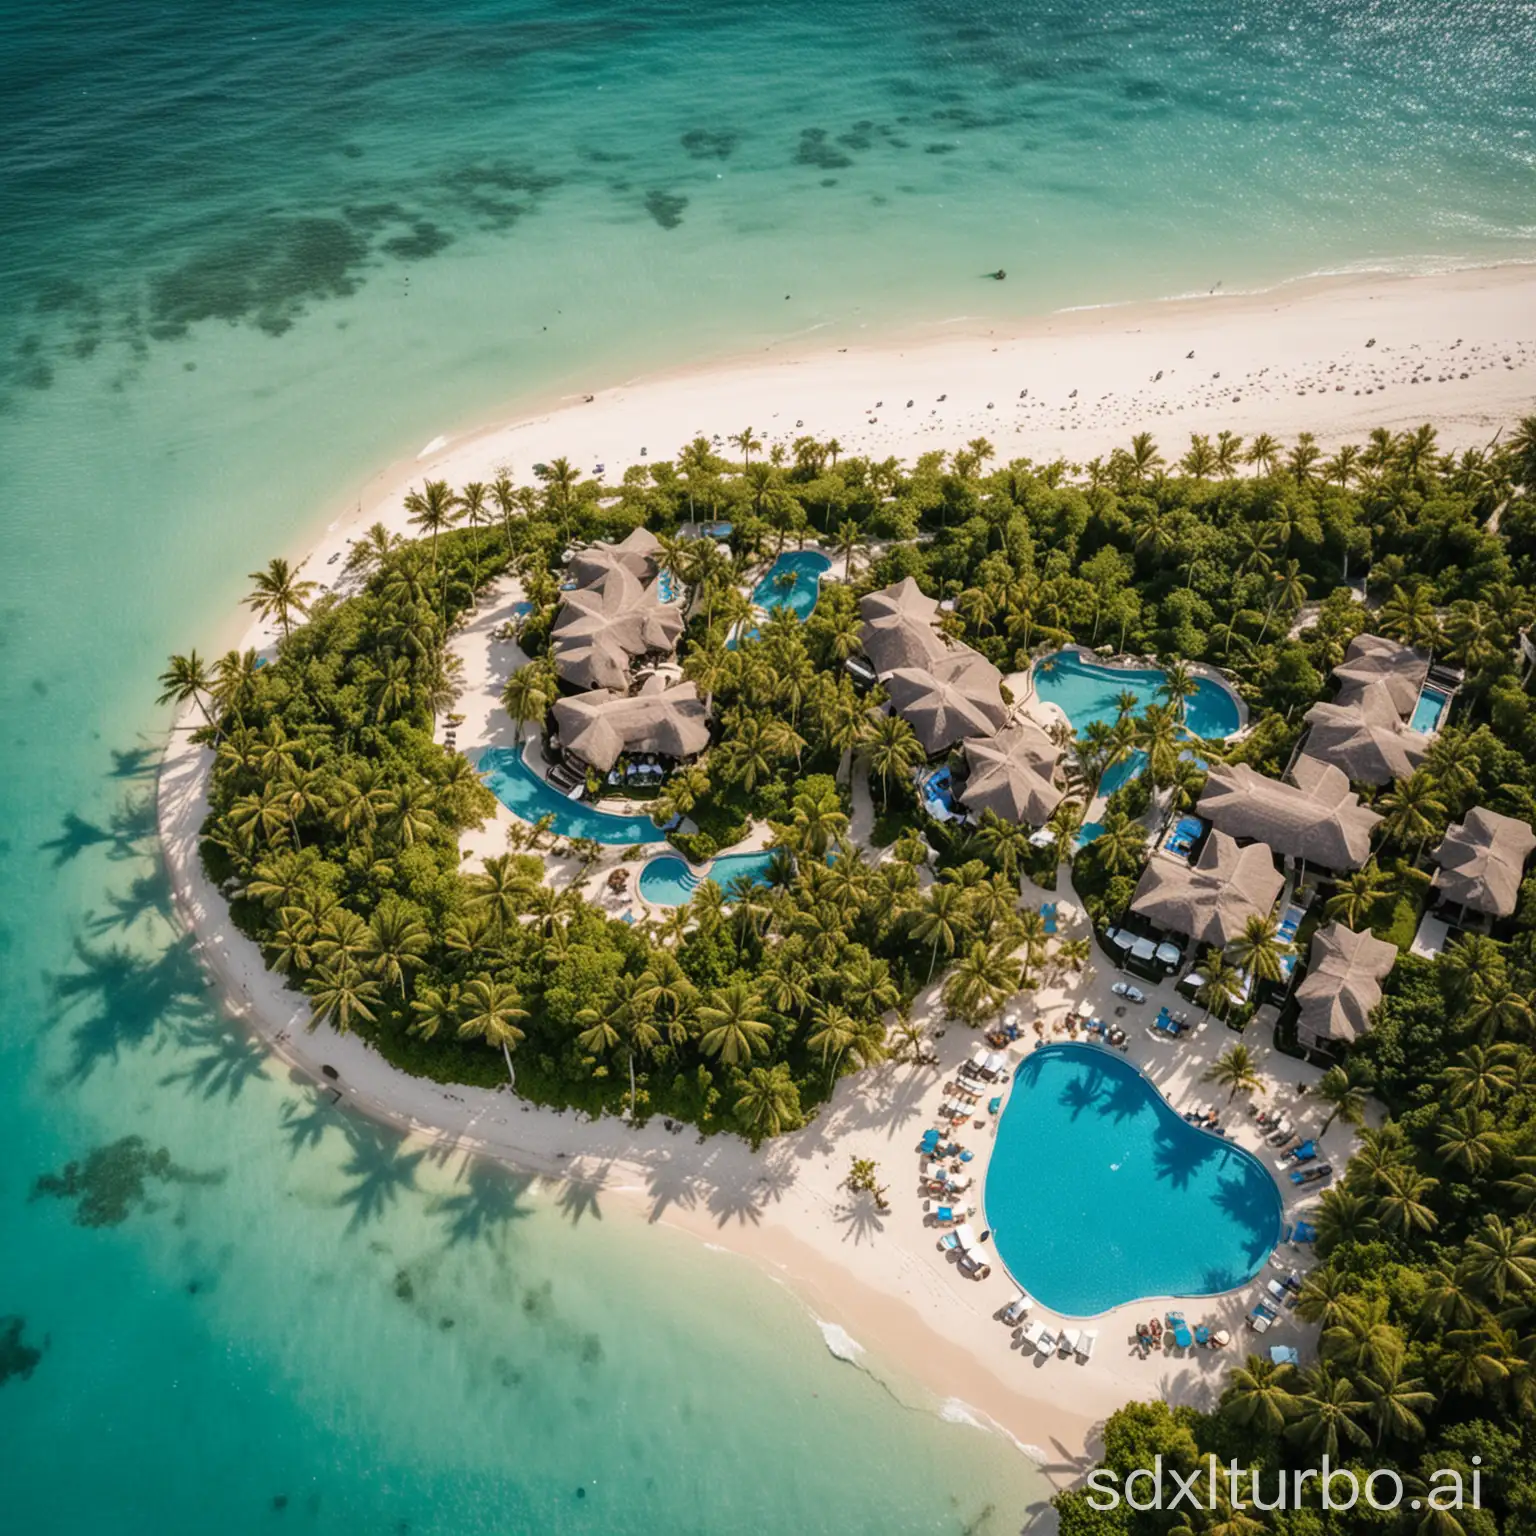 An aerial view of a luxurious resort with a white sand beach, crystal blue water, and lush green vegetation. The resort has a variety of pools and restaurants, and it is surrounded by palm trees and tropical plants.